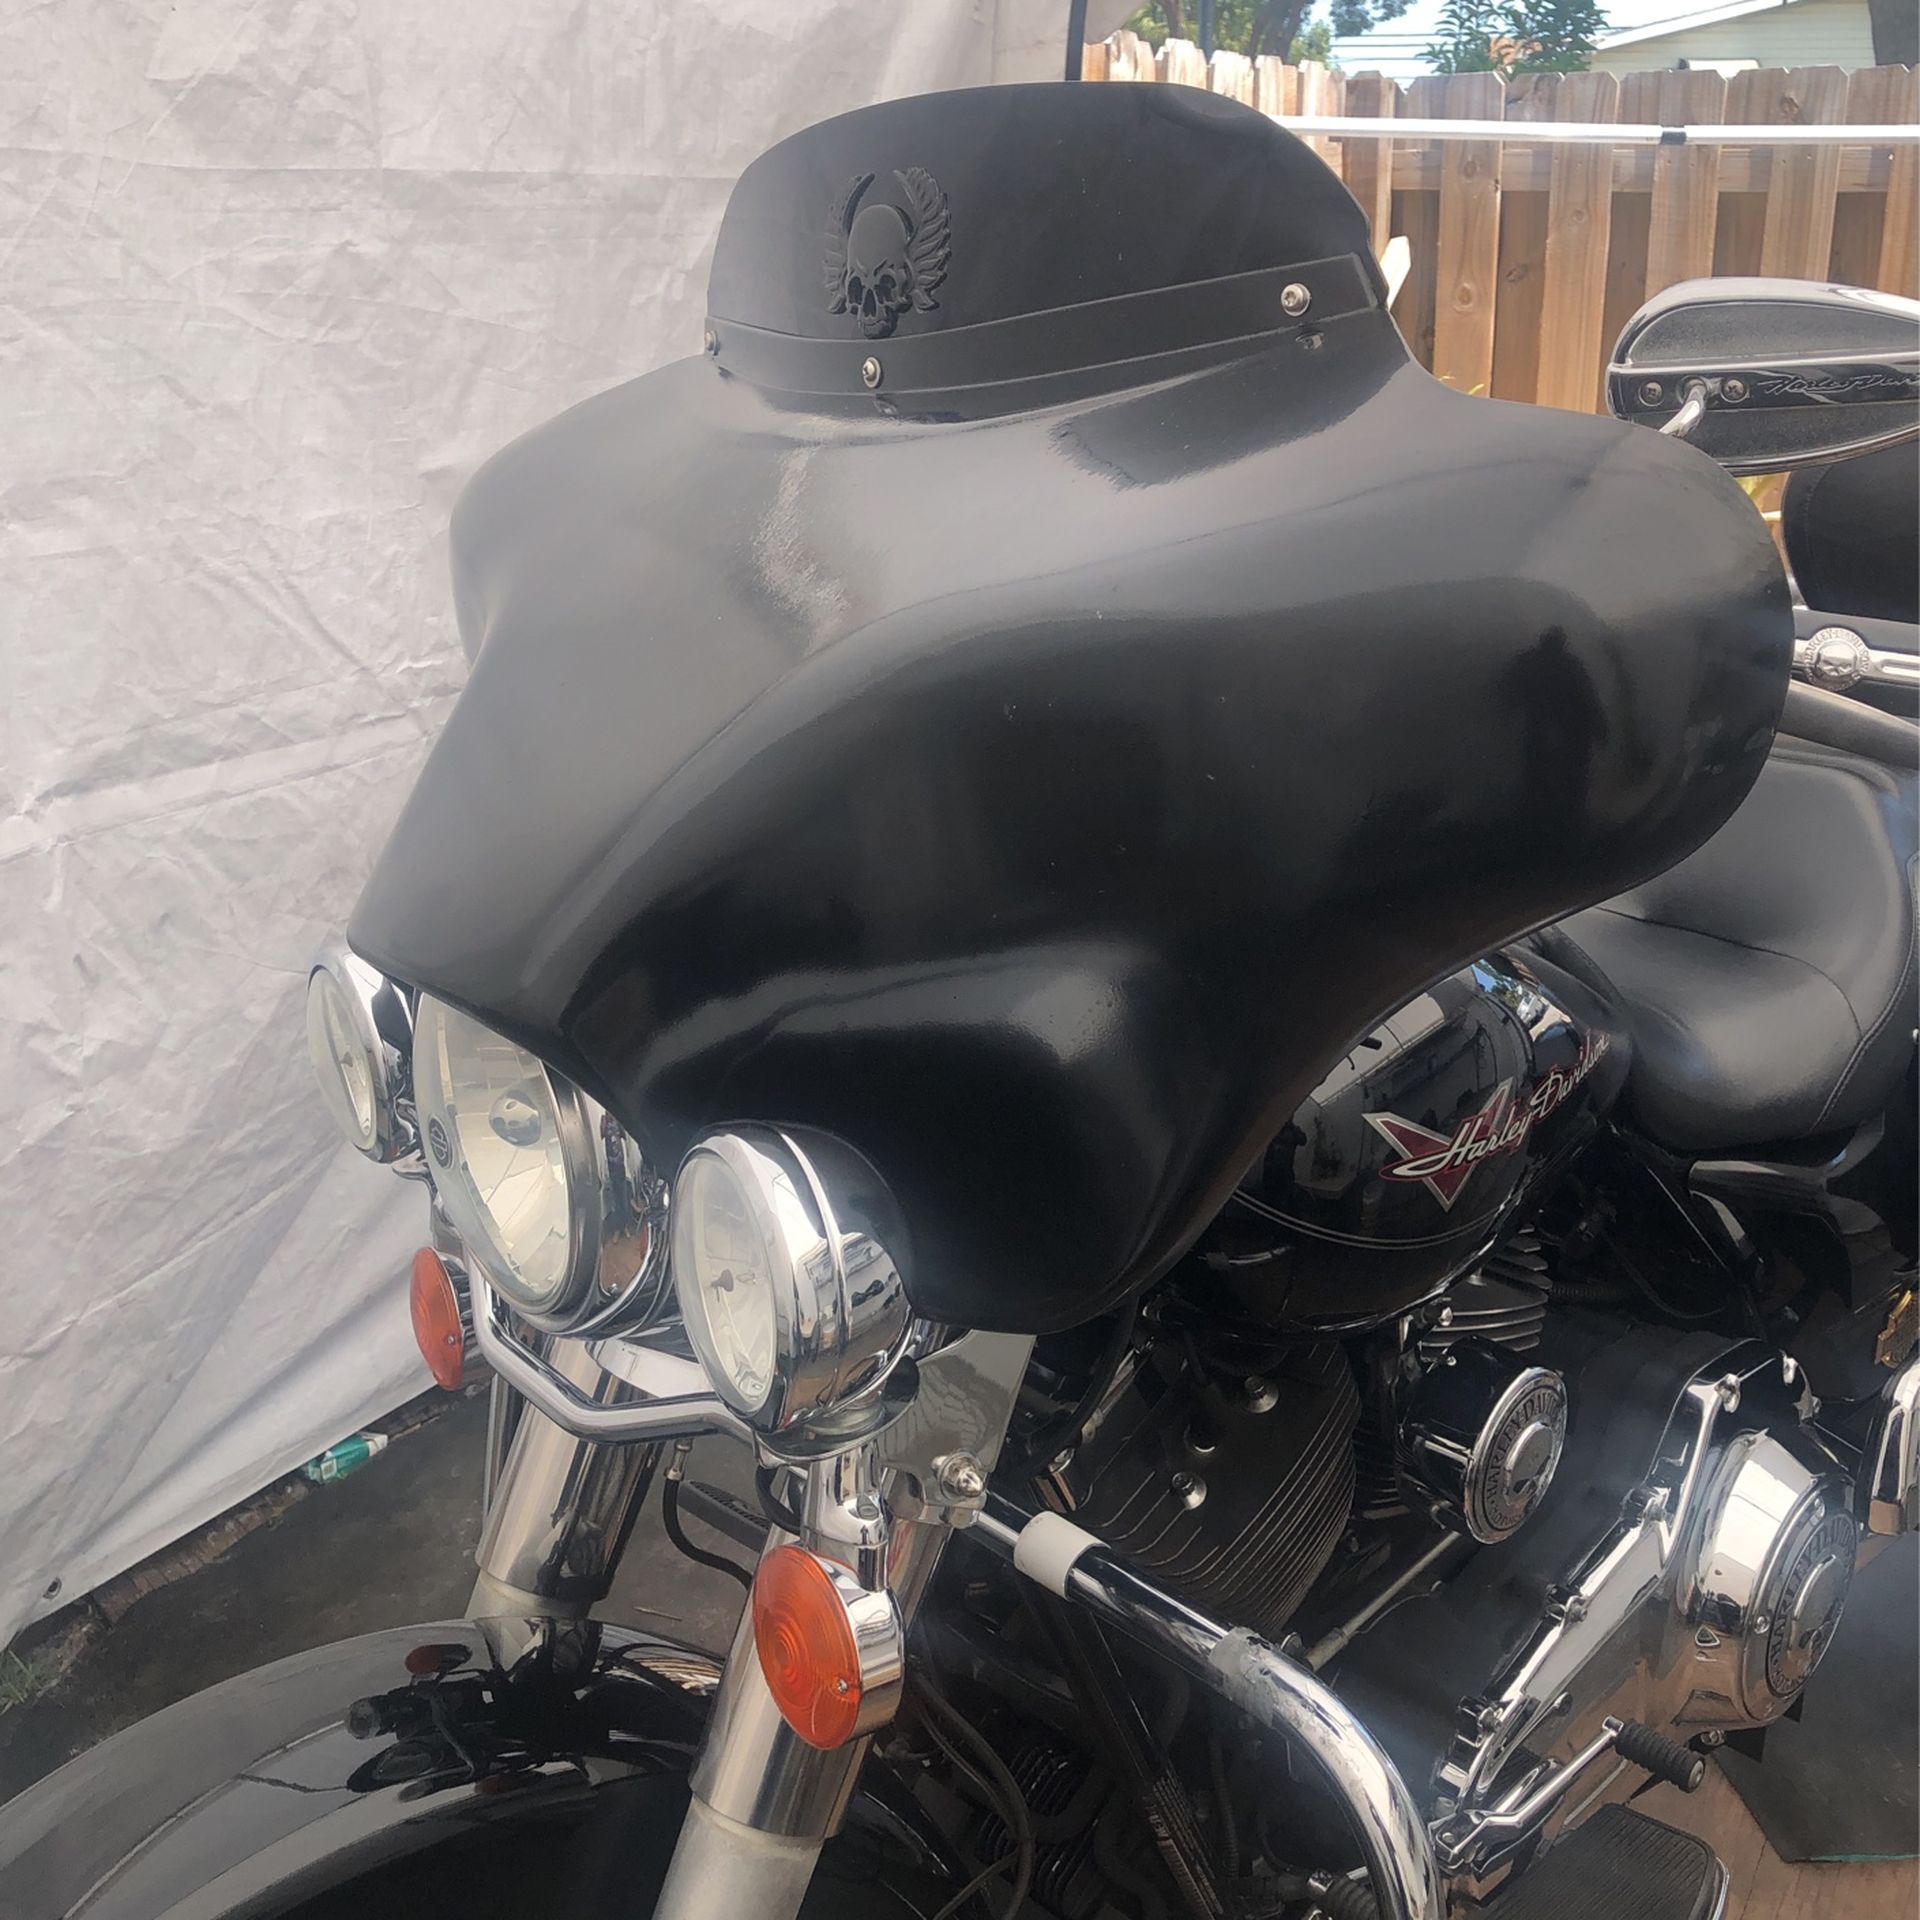 Fairing and stereo for Harley Davidson Road king or a street glide